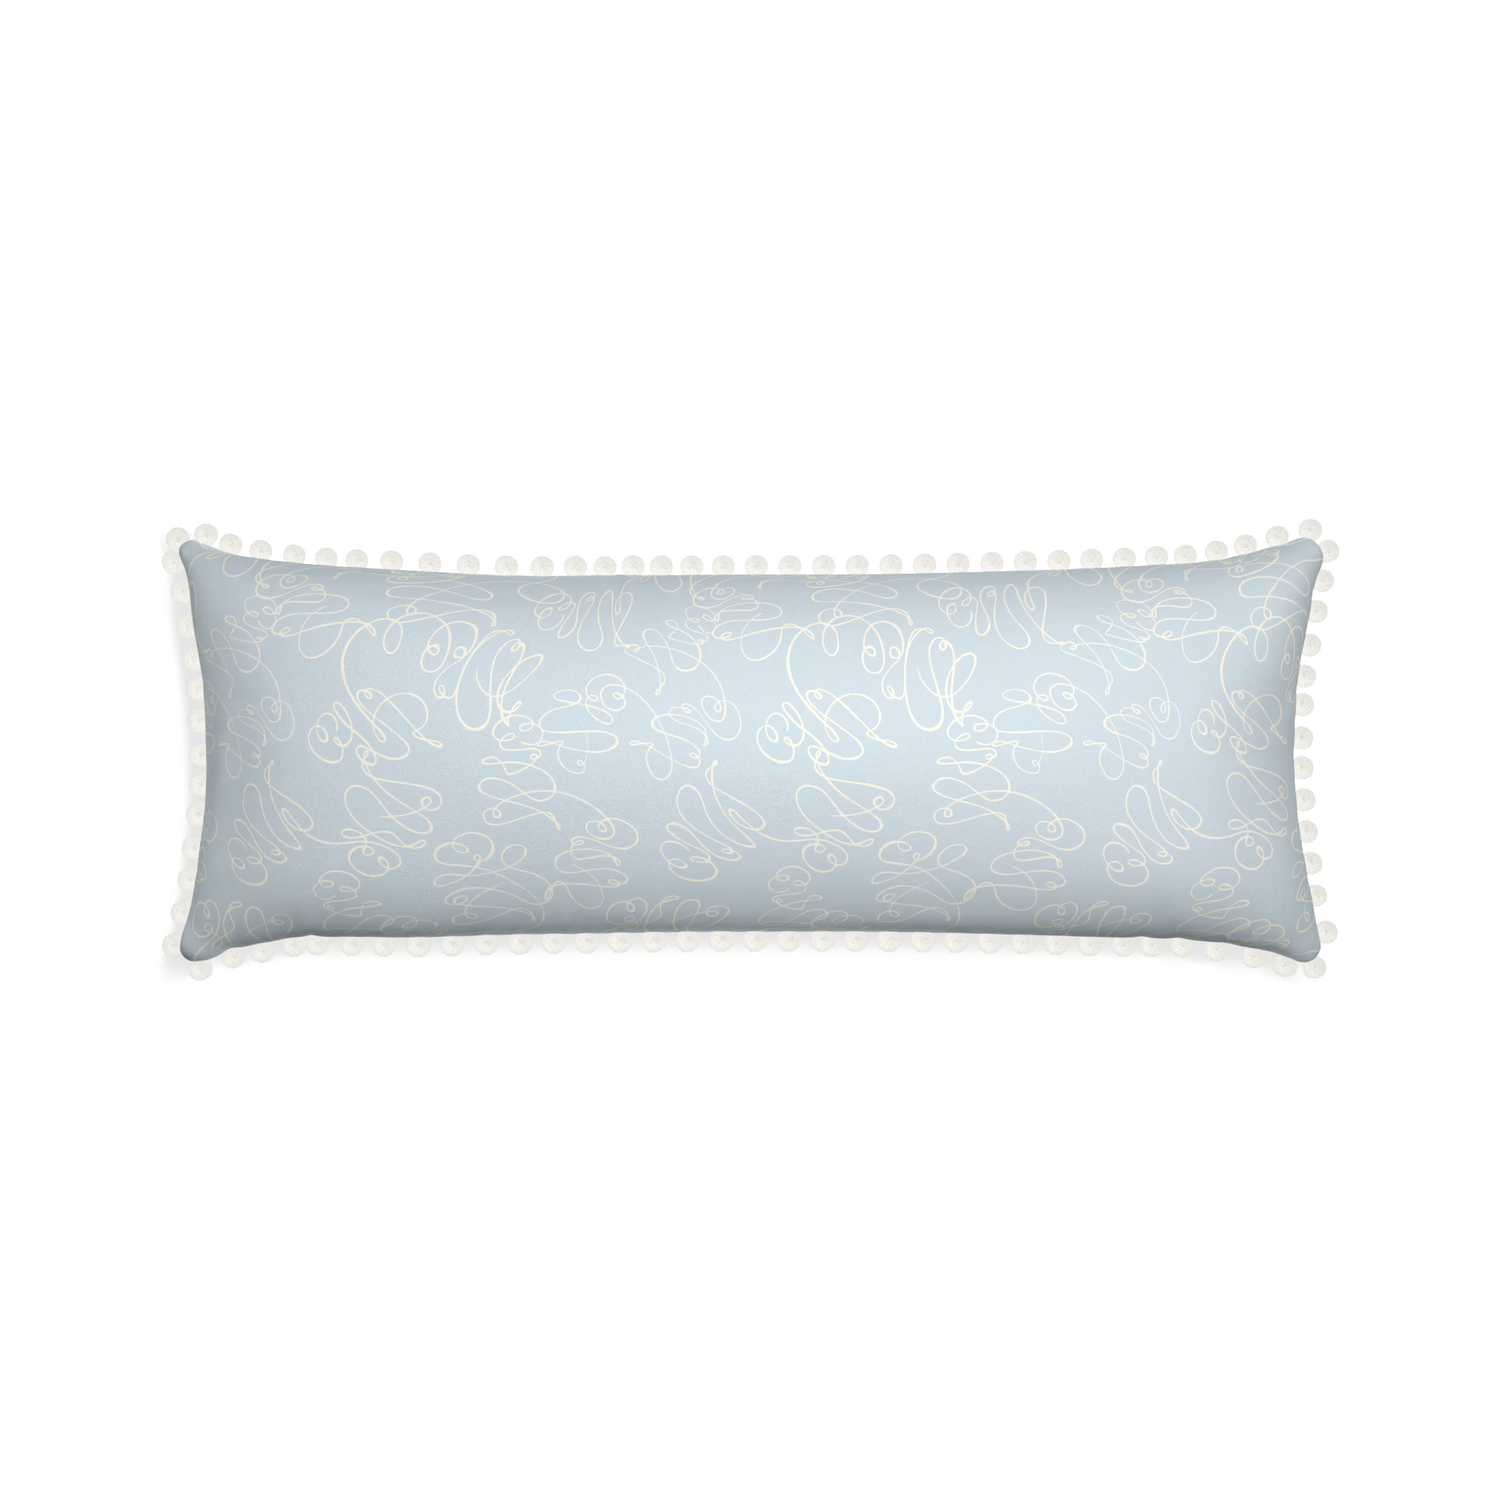 Xl-lumbar mirabella custom powder blue abstractpillow with snow pom pom on white background